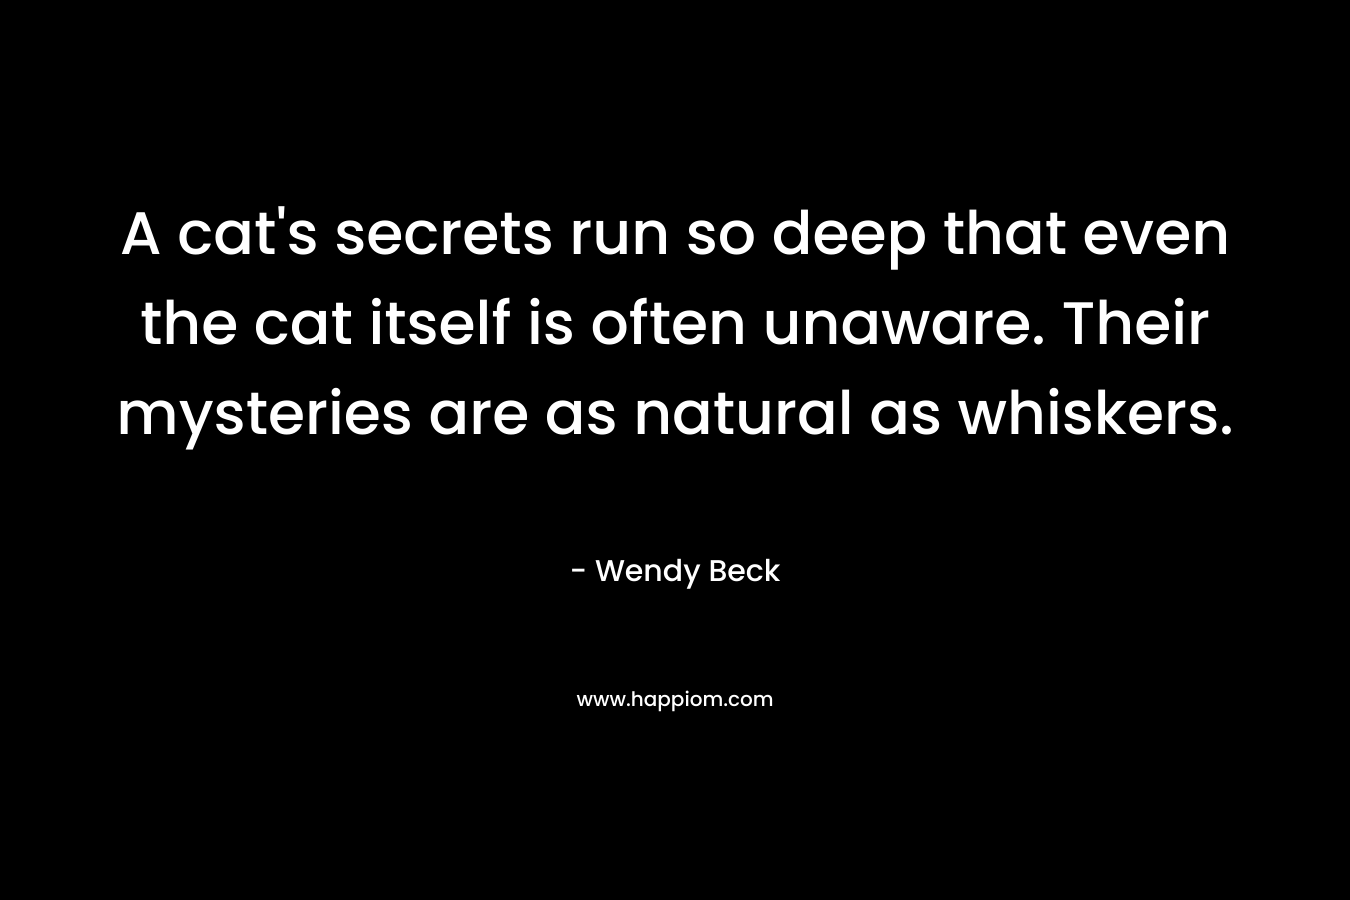 A cat's secrets run so deep that even the cat itself is often unaware. Their mysteries are as natural as whiskers.